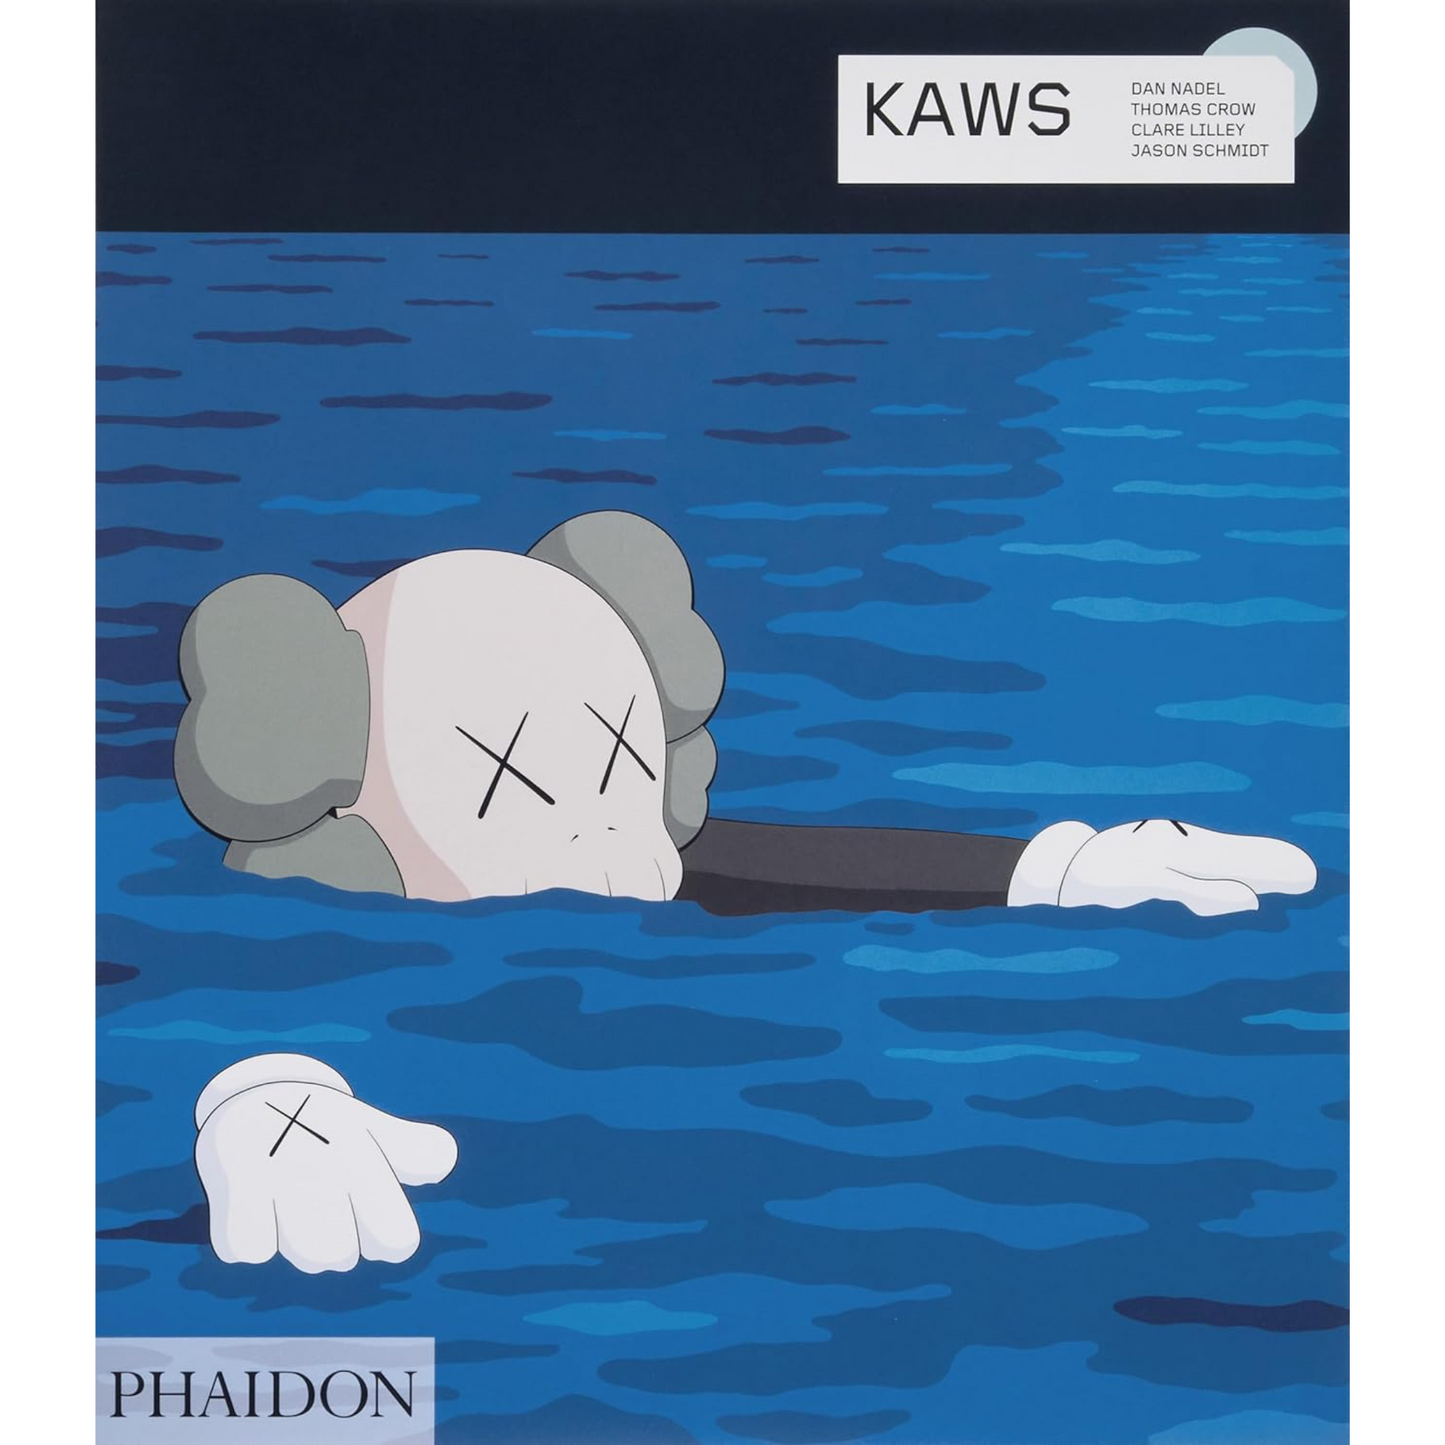 Cover with KAWS cartoon character apparently drowning.